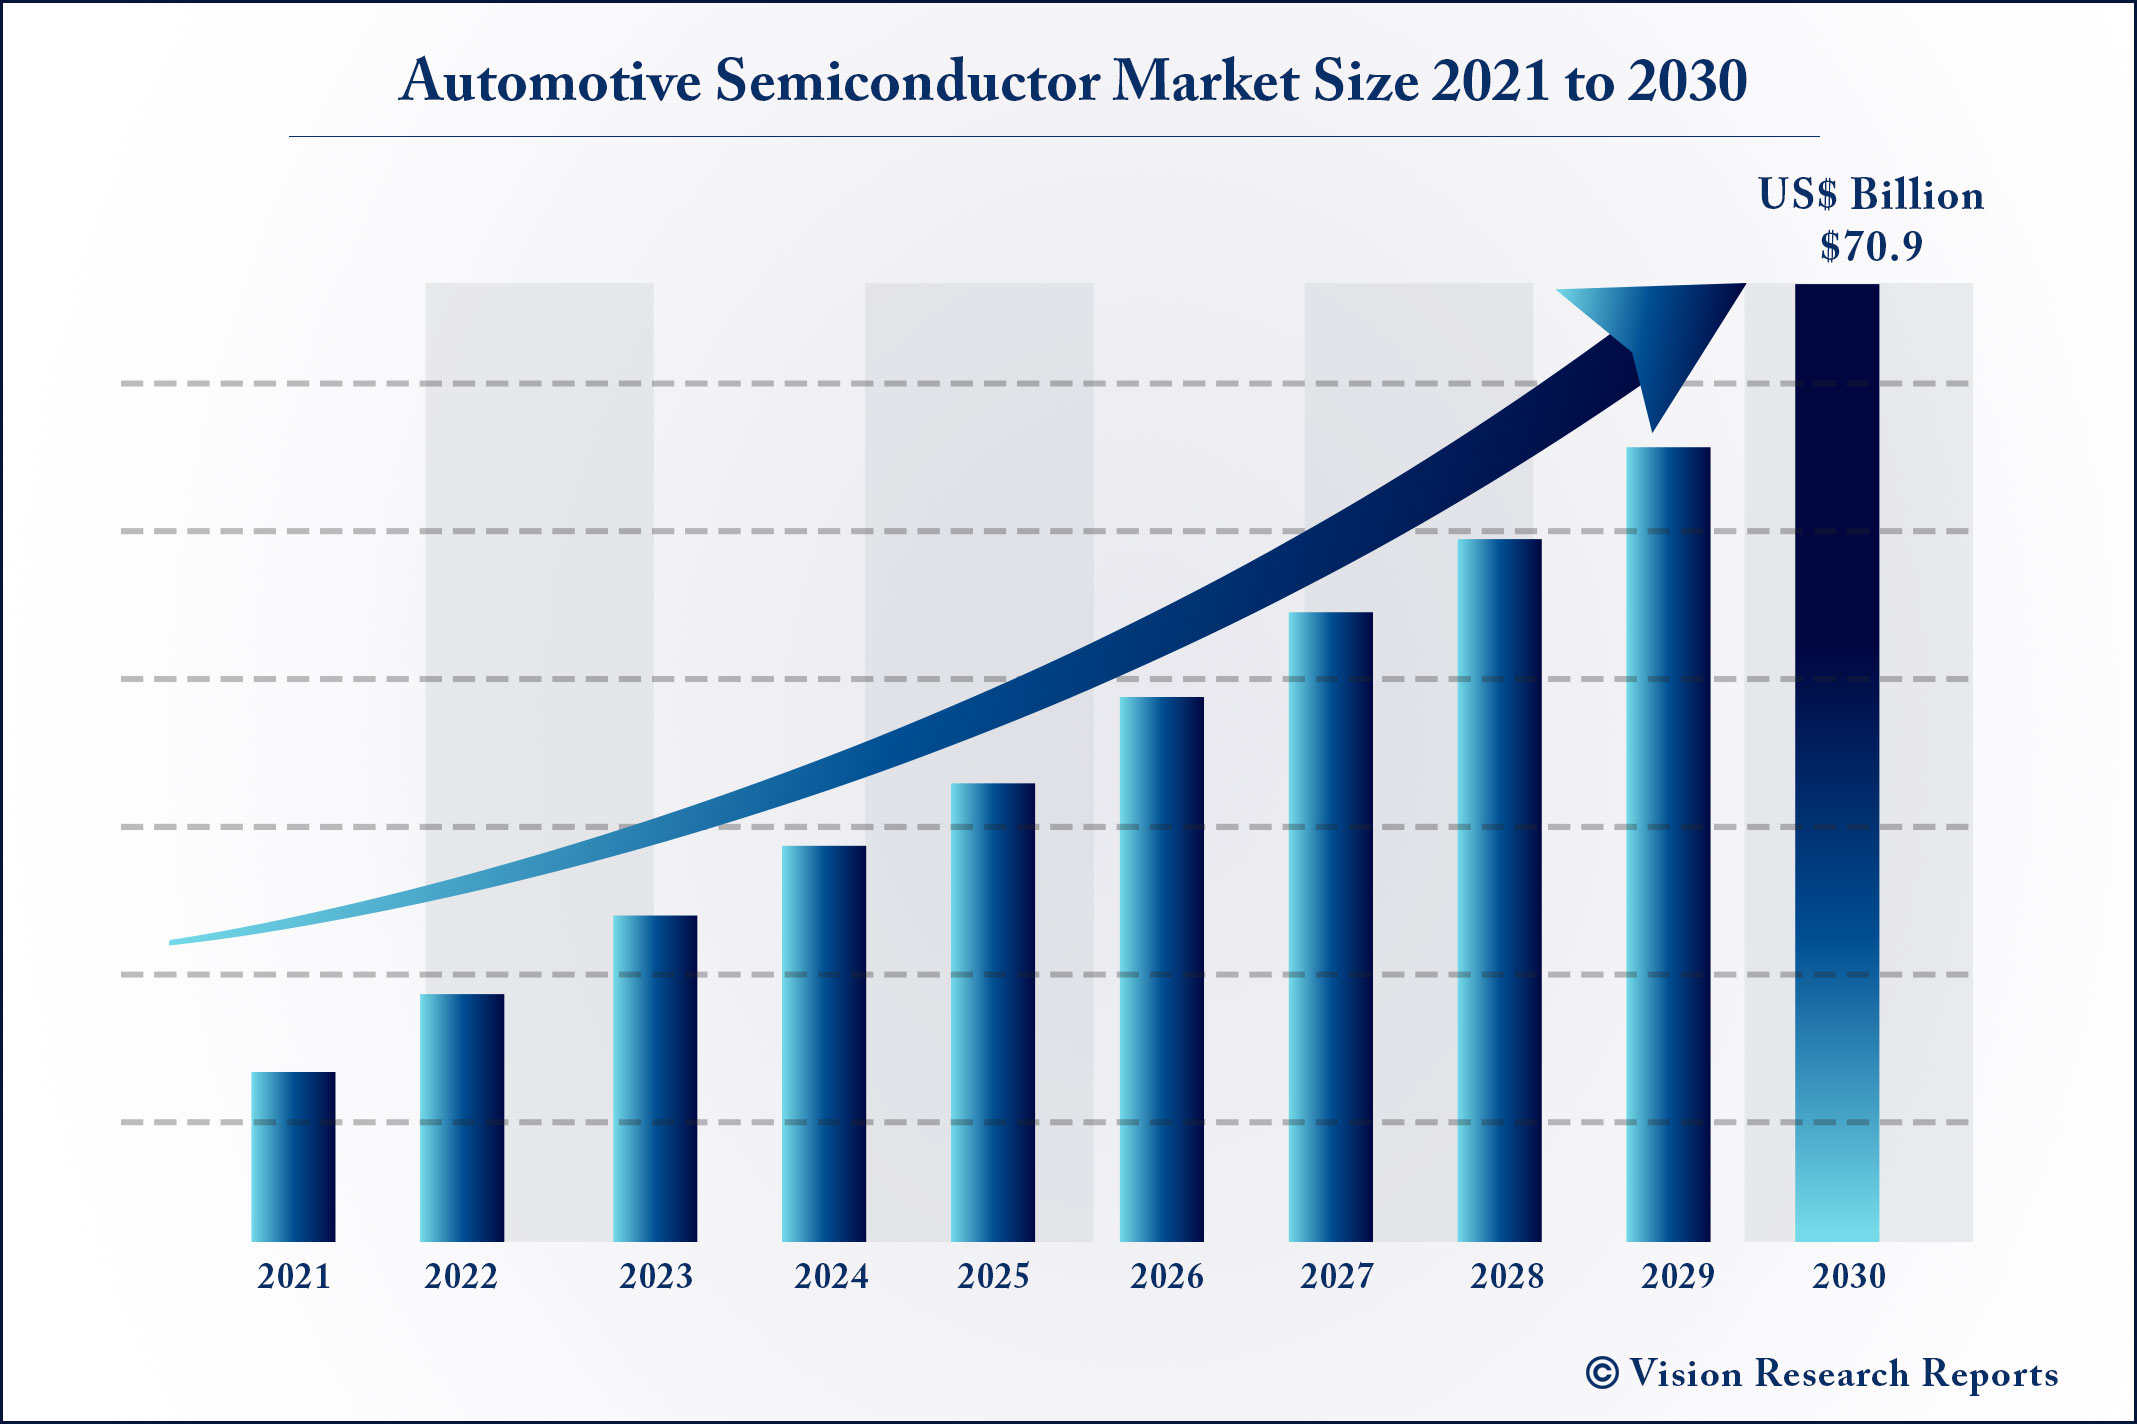 Automotive Semiconductor Market Size 2021 to 2030